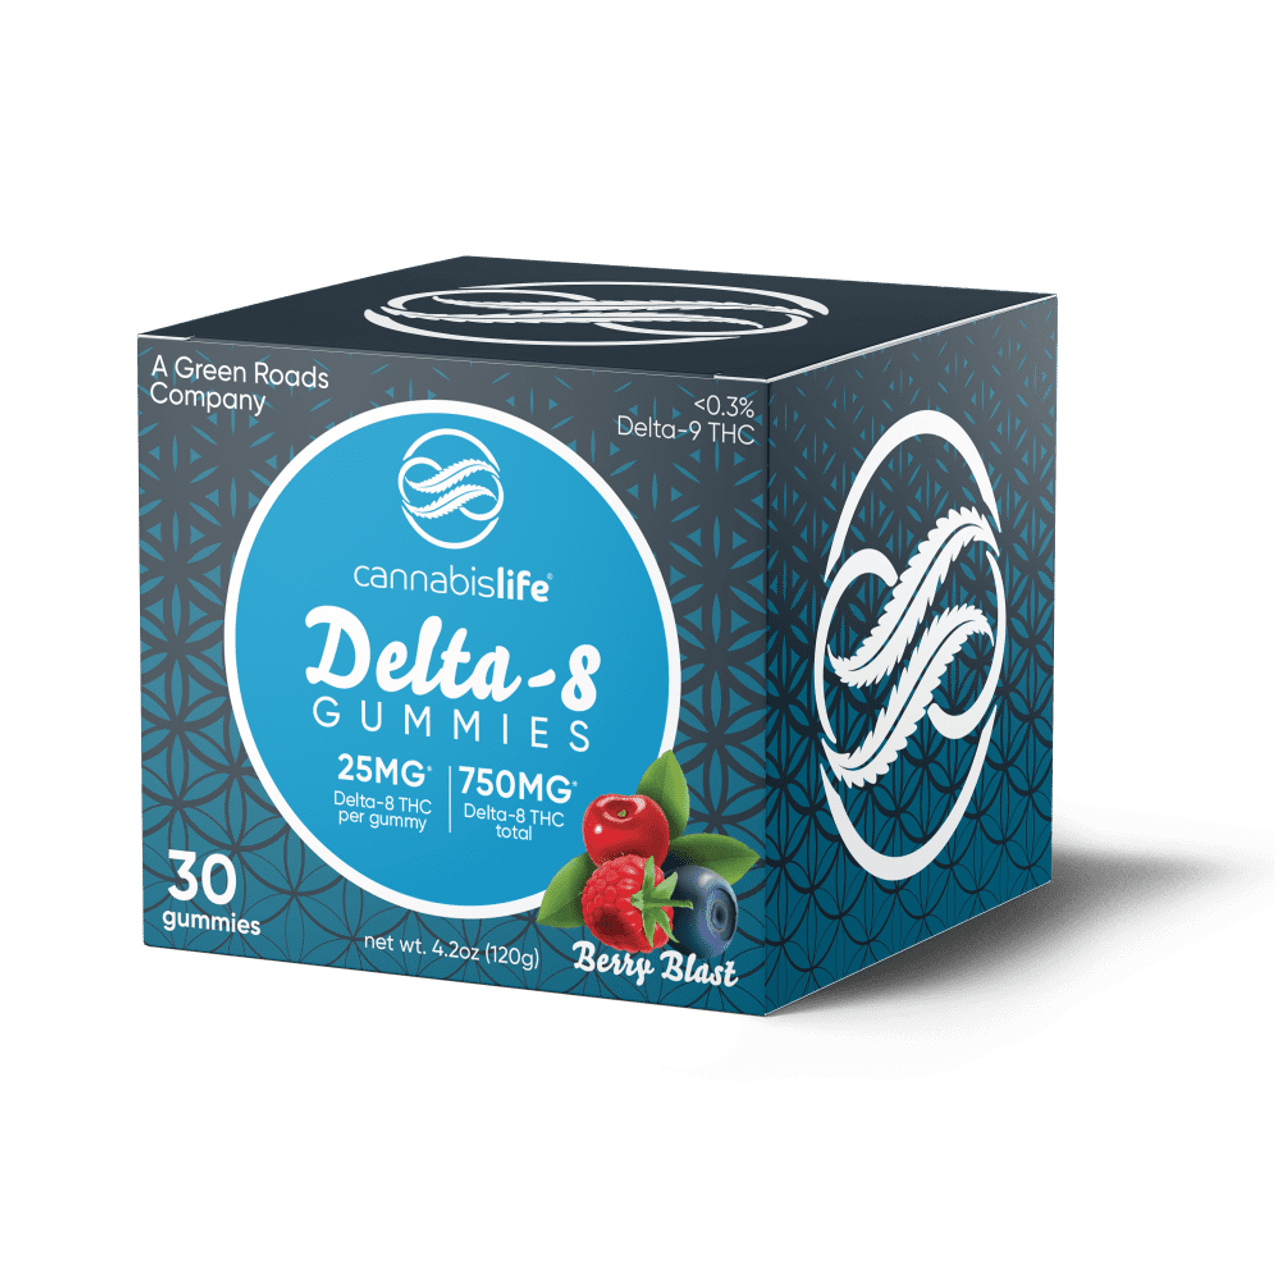 Delta 8 THC Gummies vs. CBD Gummies: What's the Difference?